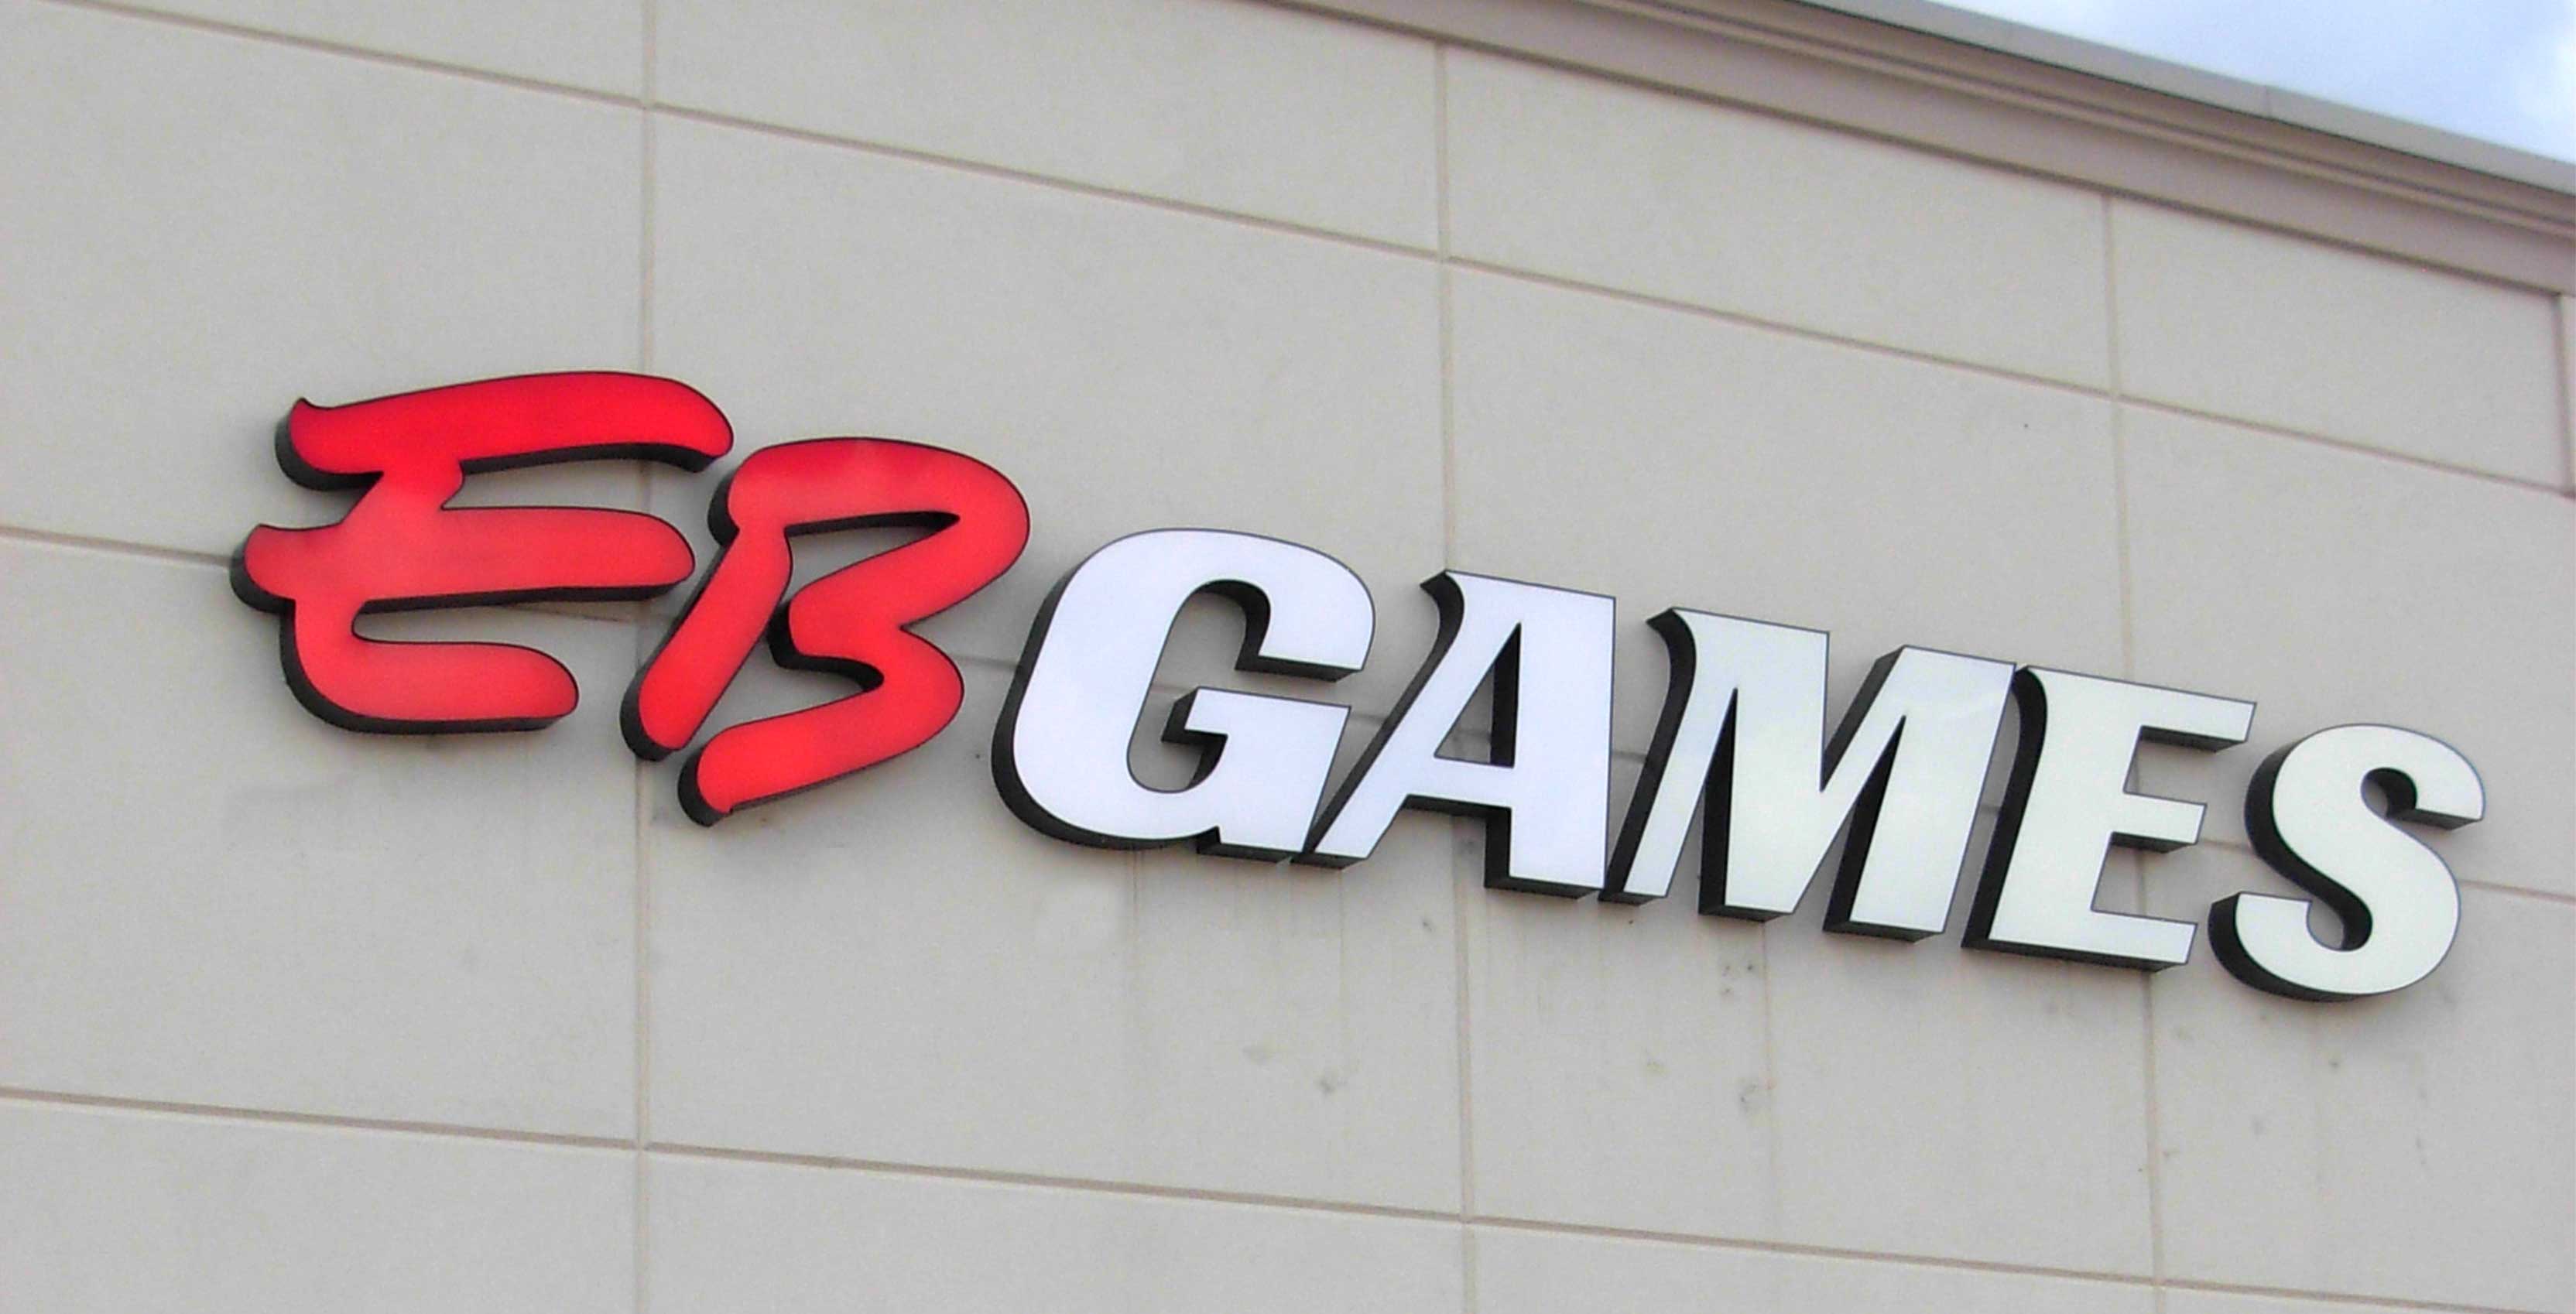 eb games ps3 games